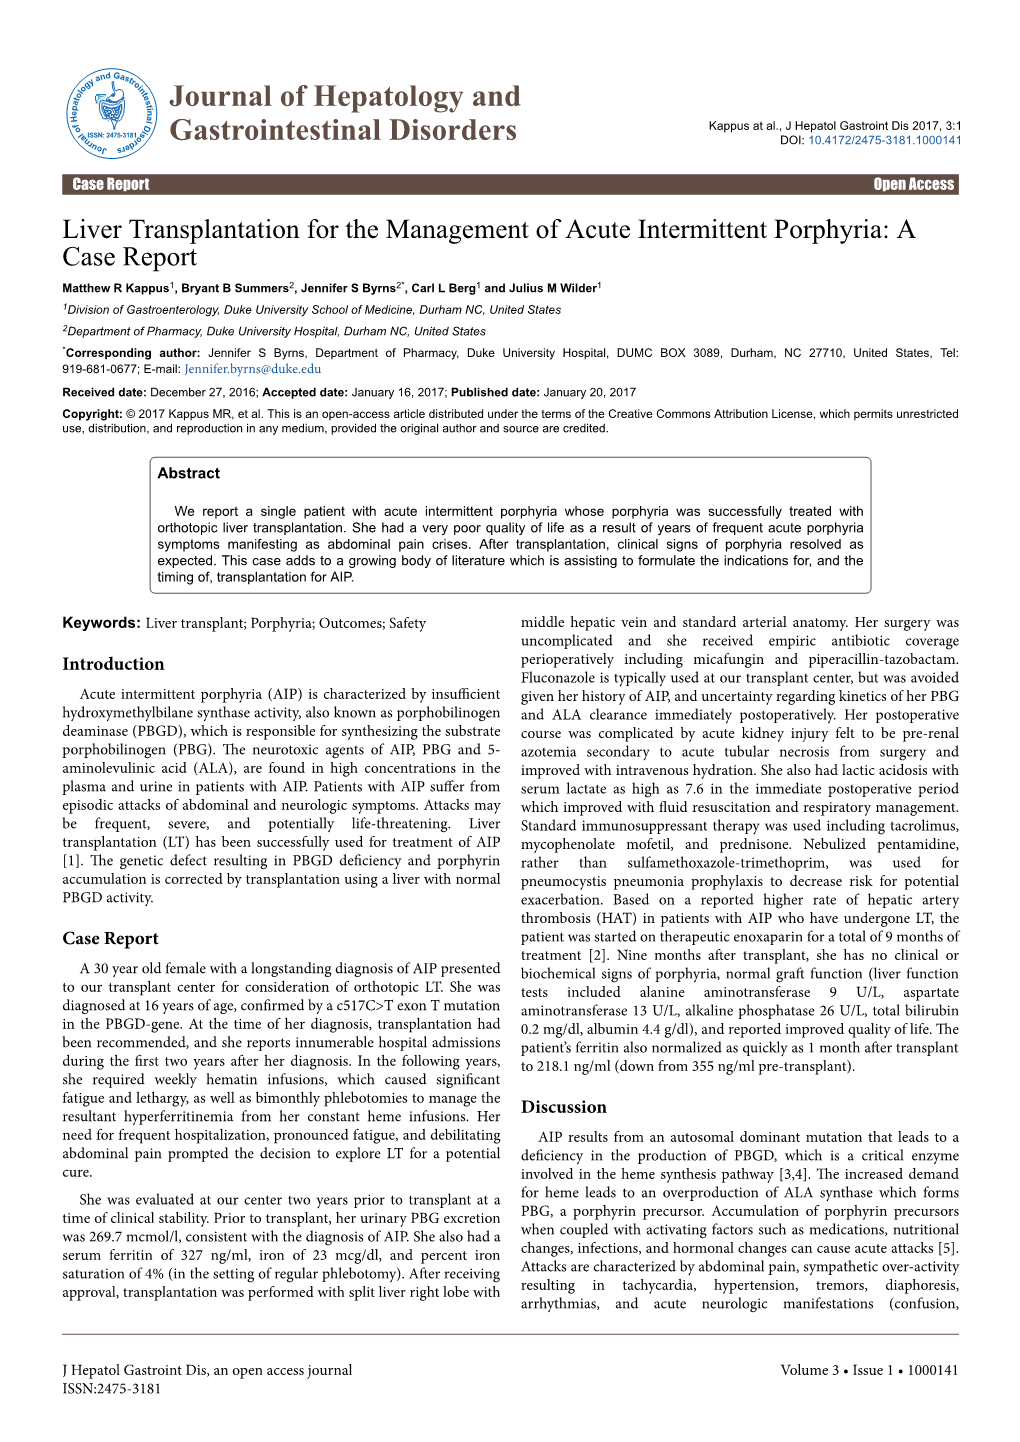 Liver Transplantation for the Management of Acute Intermittent